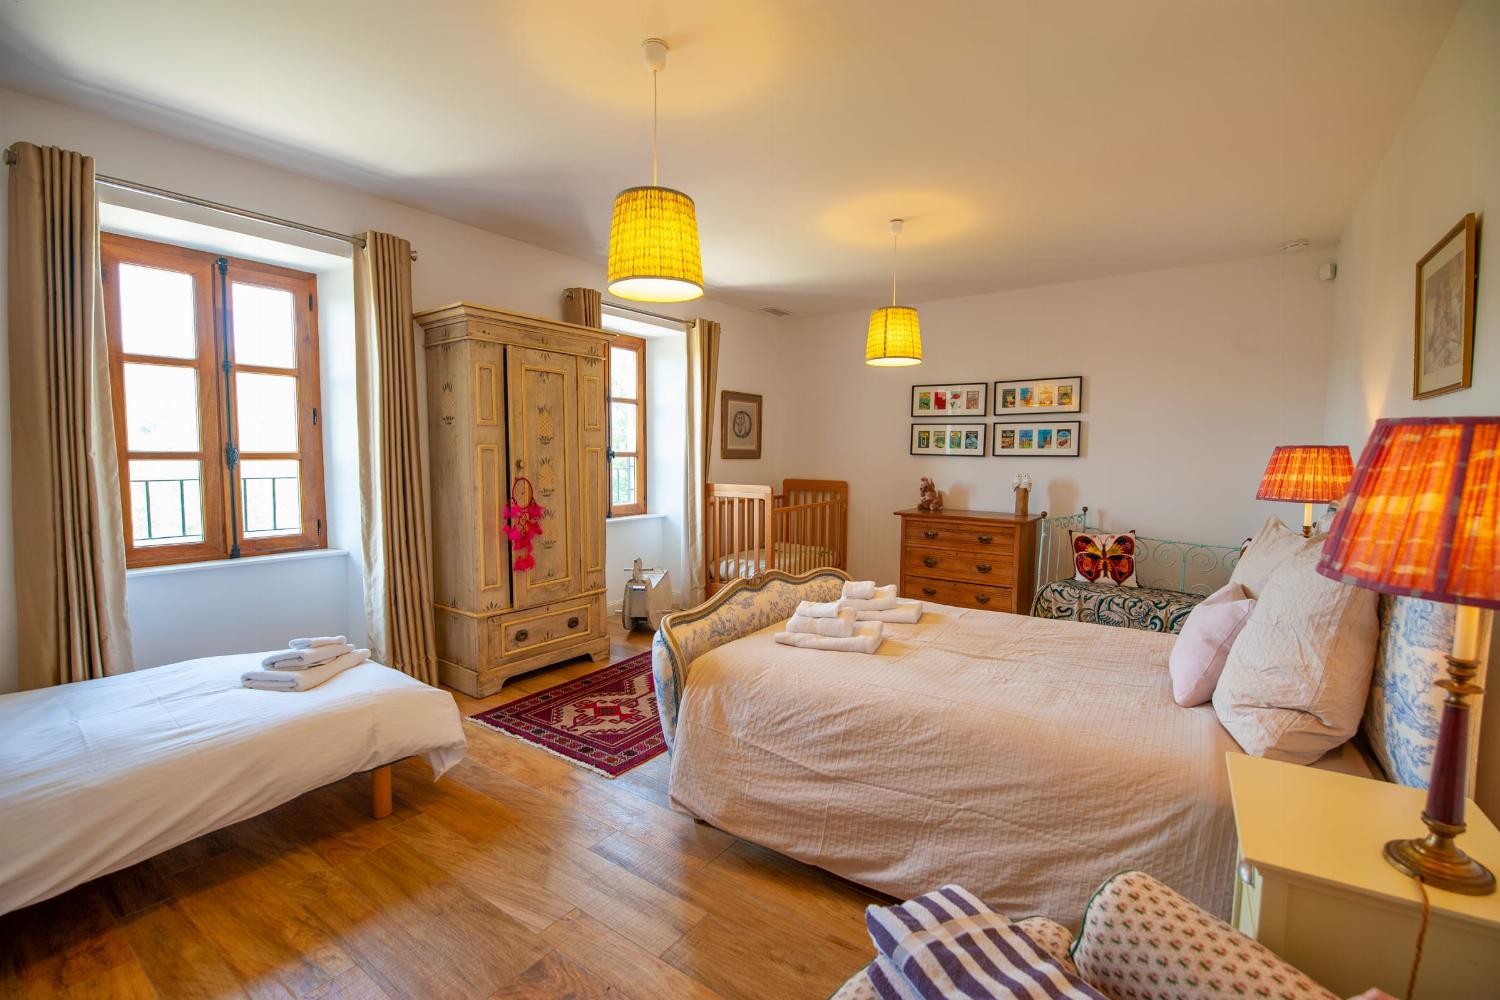 Children's bedroom | Holiday accommodation in the South of France